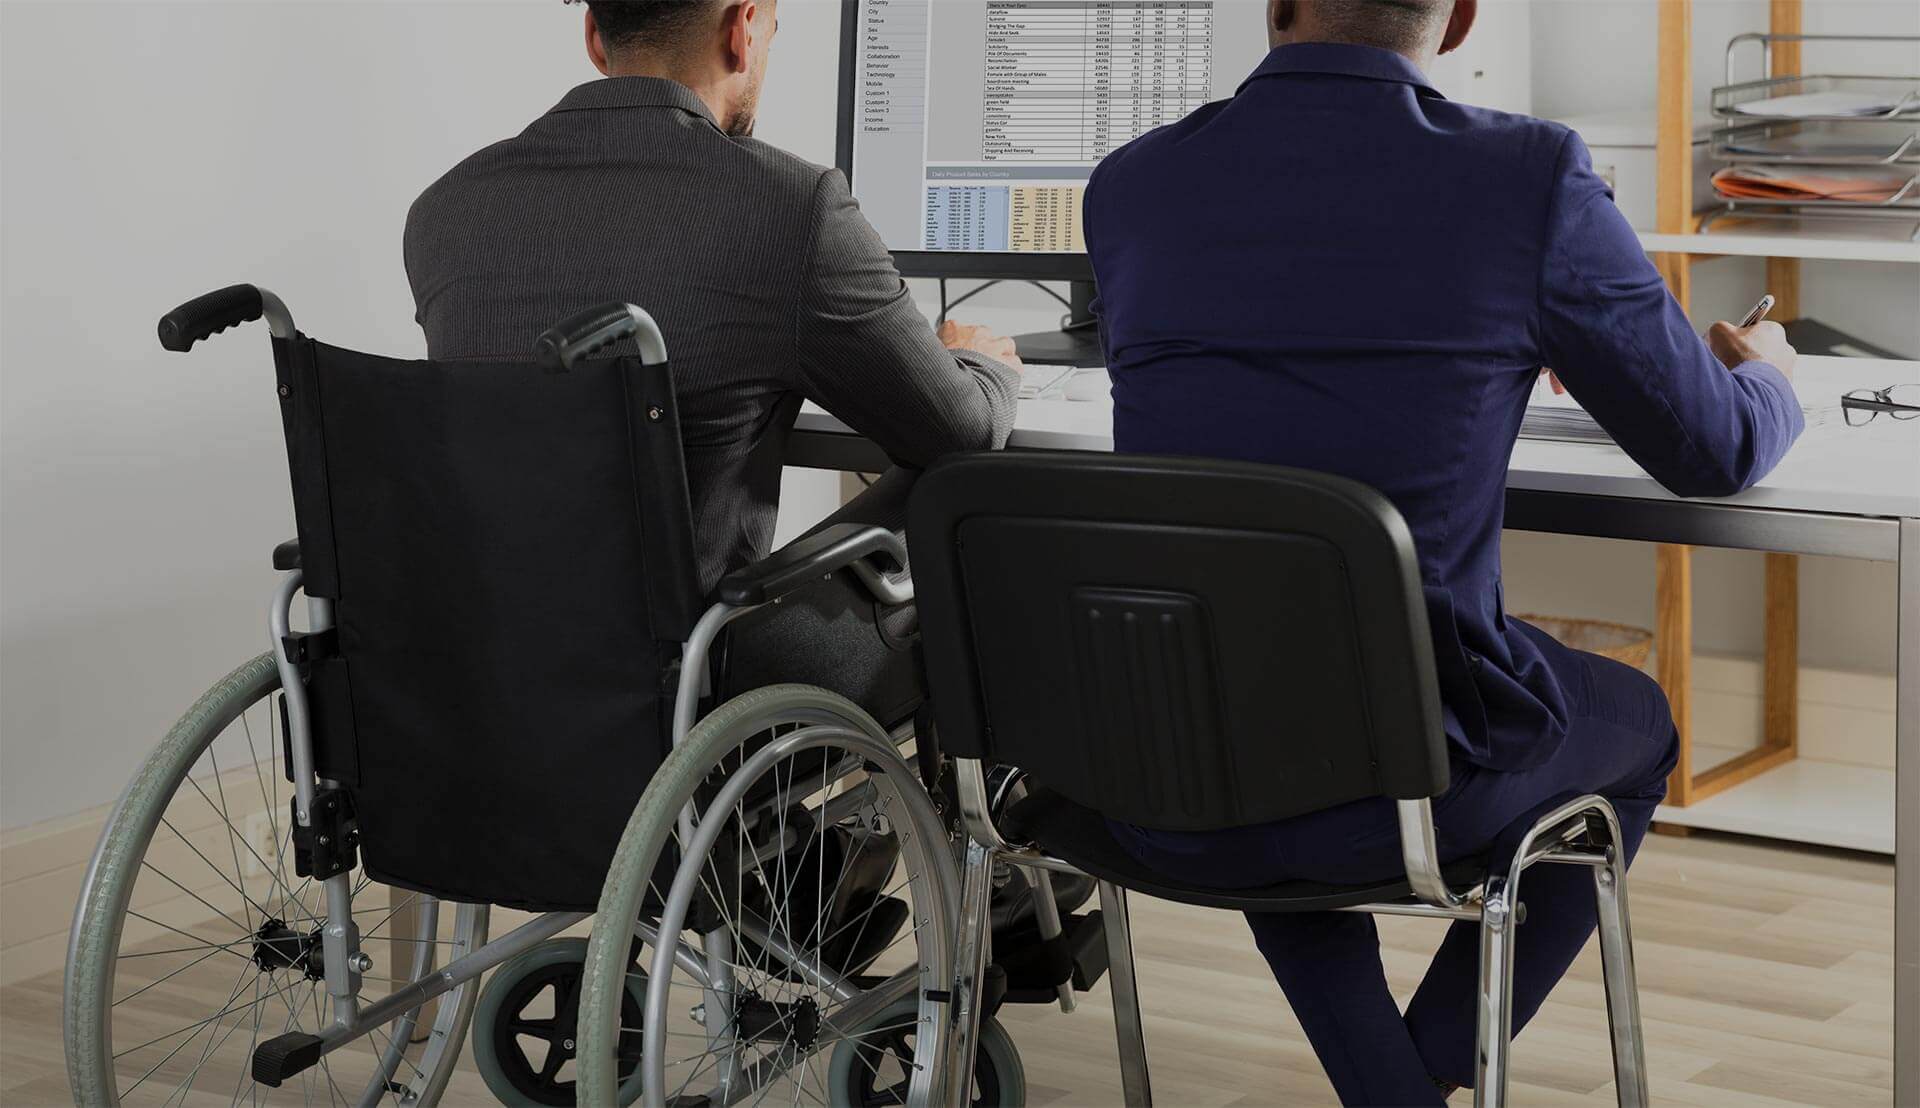 Everything you need to know about making websites accessible for people with disabilities